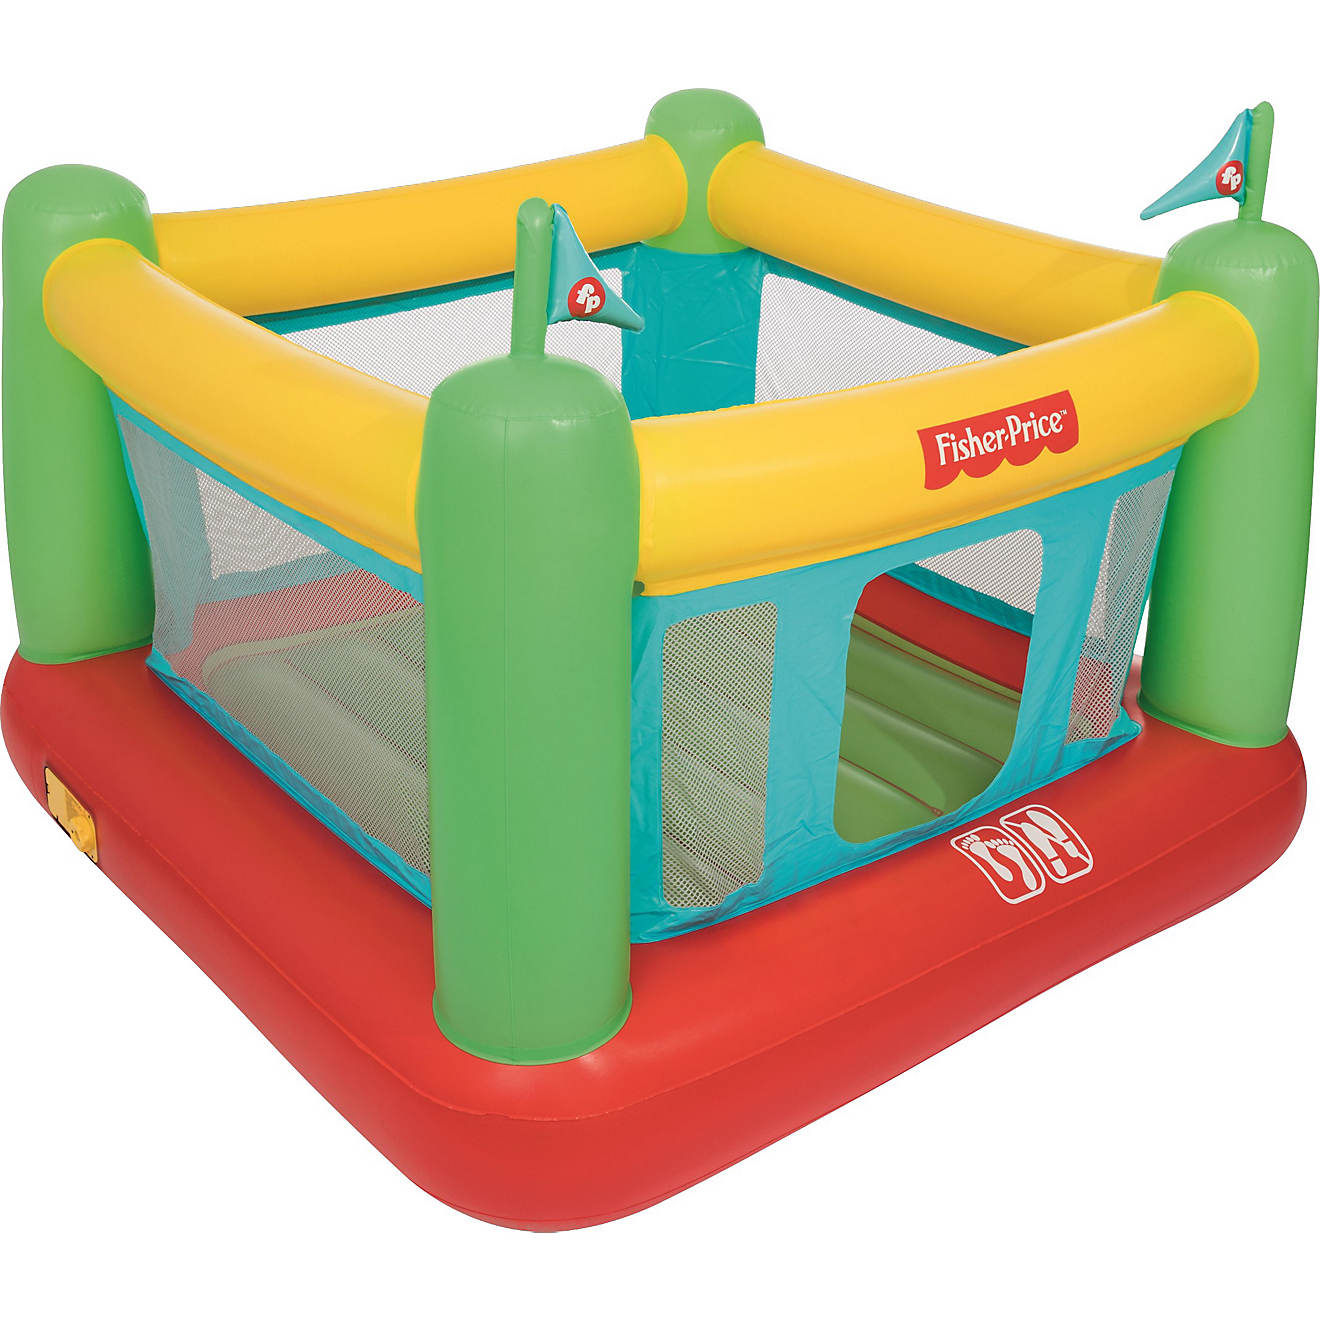 Bestway Fisher Price Bouncesational Bouncer                                                                                      - view number 1